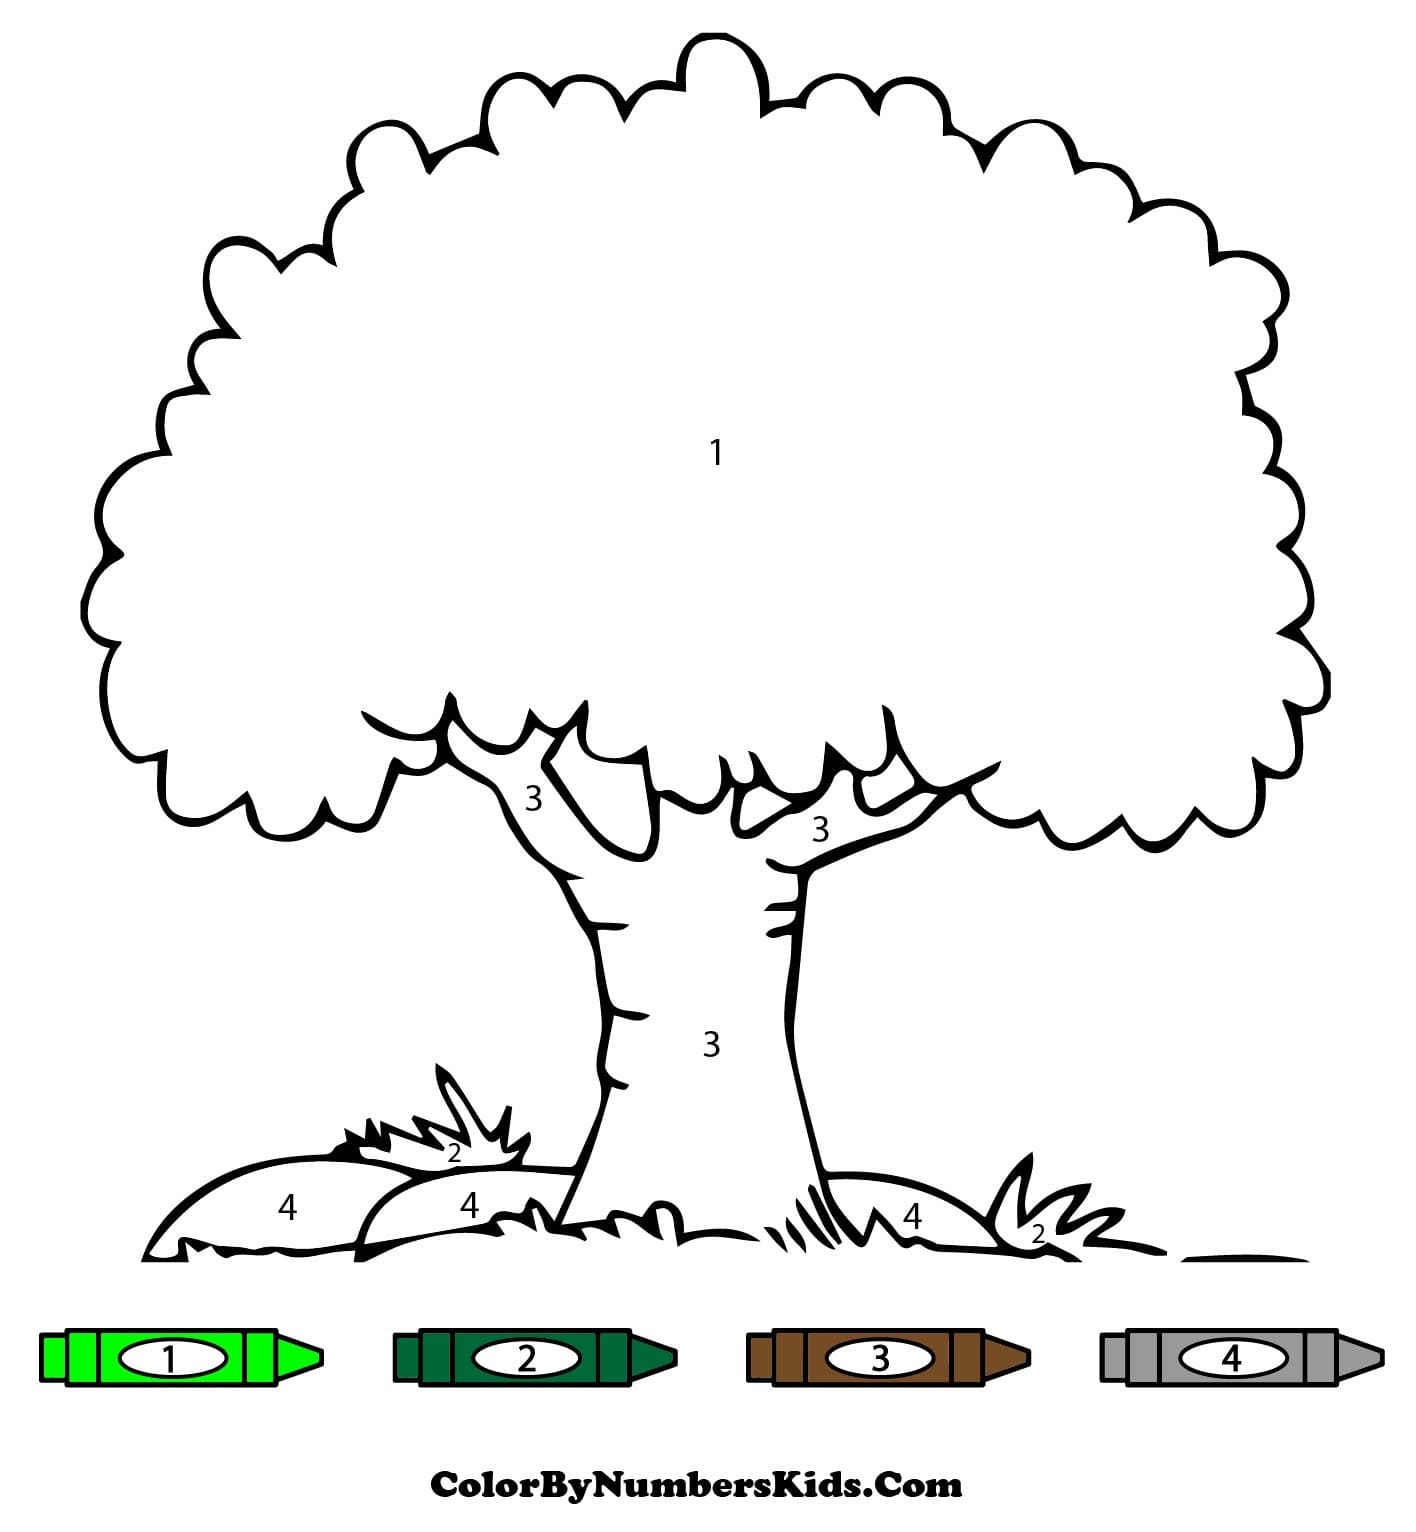 Printable Tree Color By Number